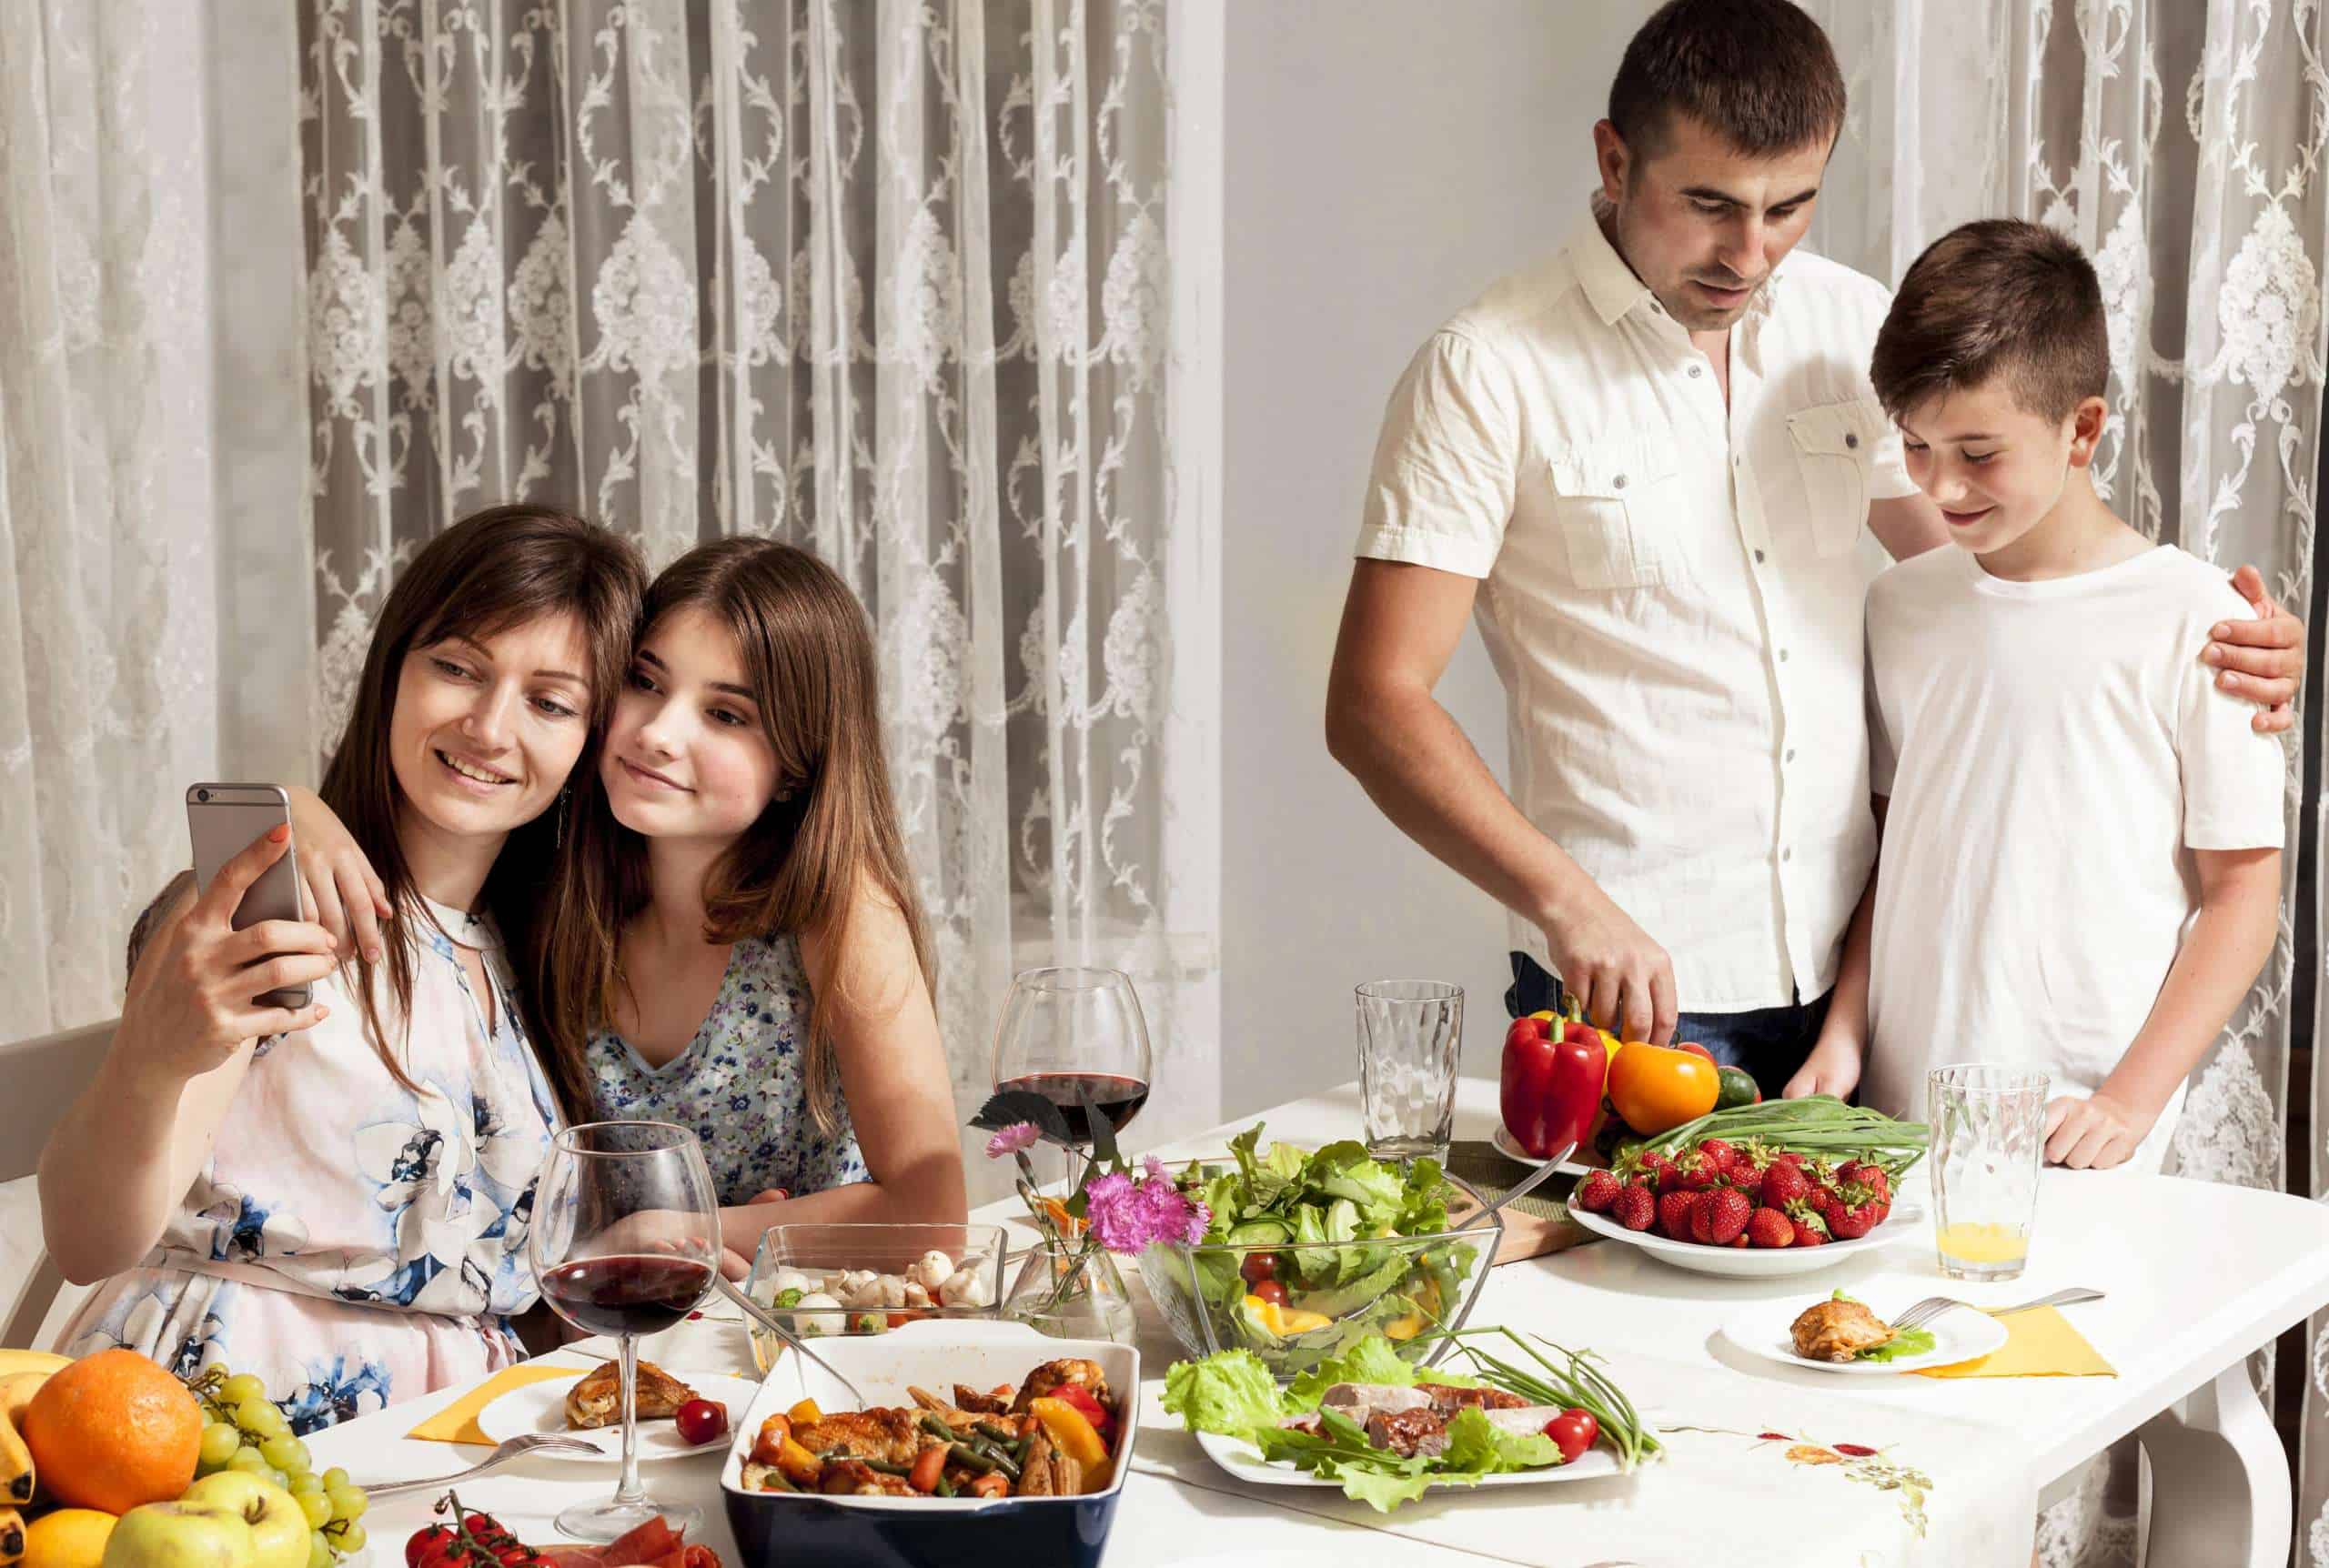 Why sit down together at the table – the importance of family meals